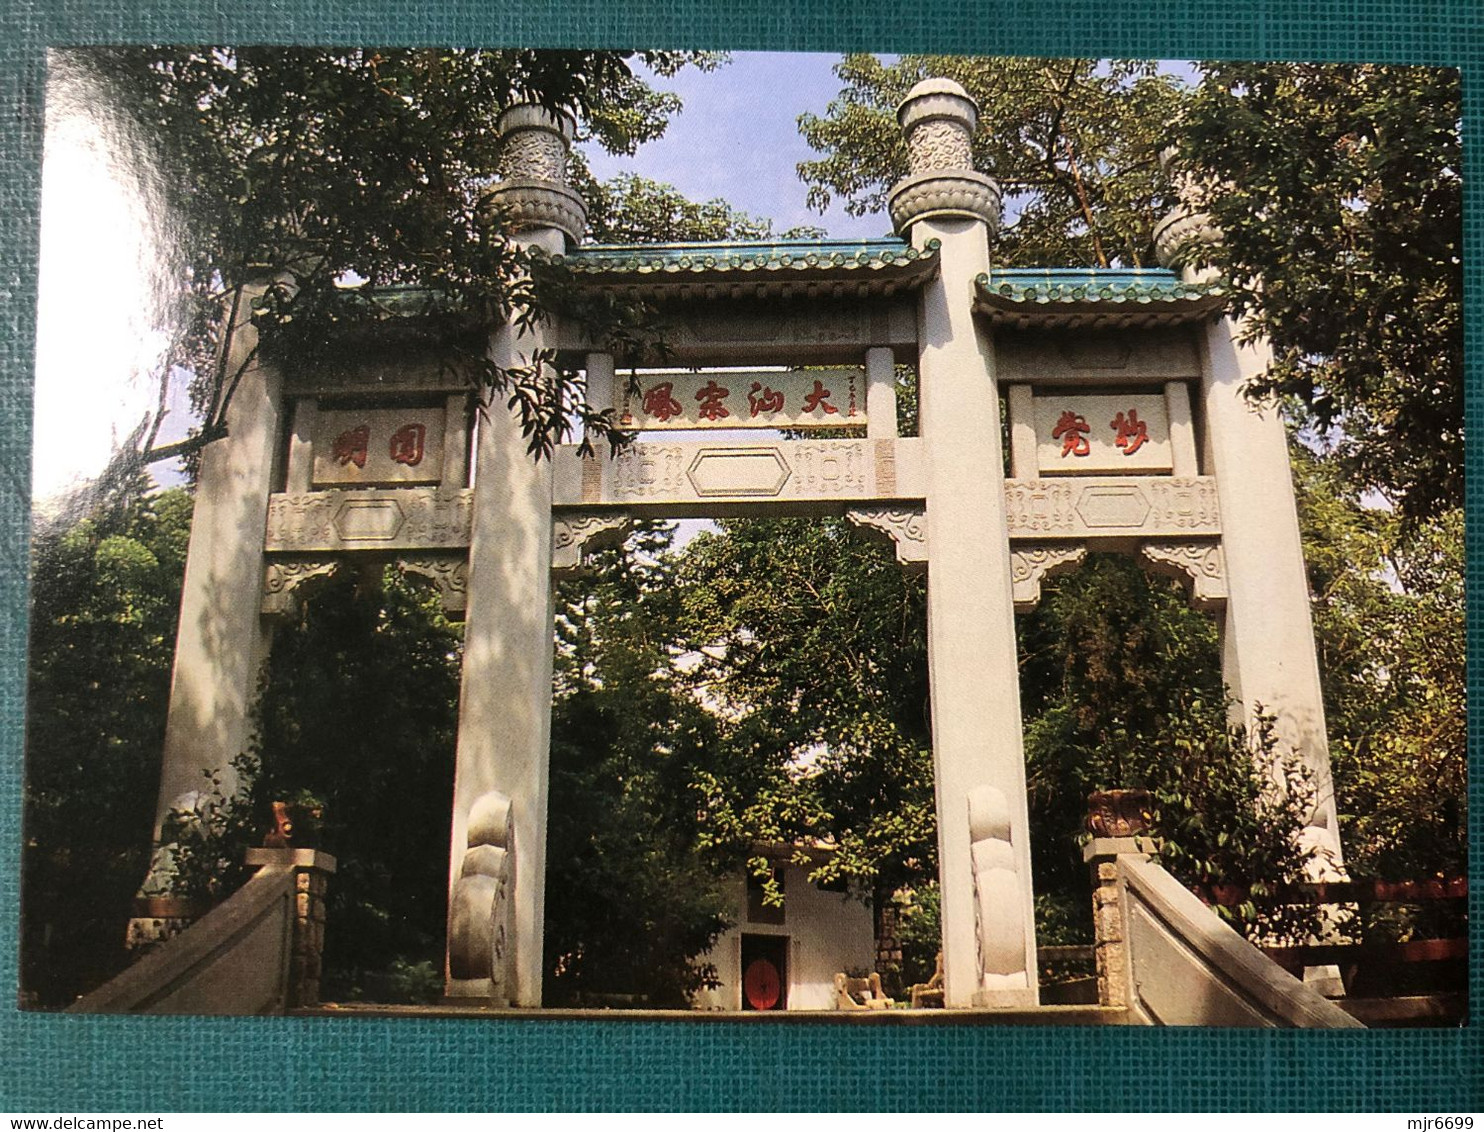 MACAU 1970'S, TEMPLE OF KUN IAM (GODNESS OF MERCY), ANOTHER VIEW BOOK STORE PRINTING, SIZE 14,8 X 10CM, #102-B - Macao